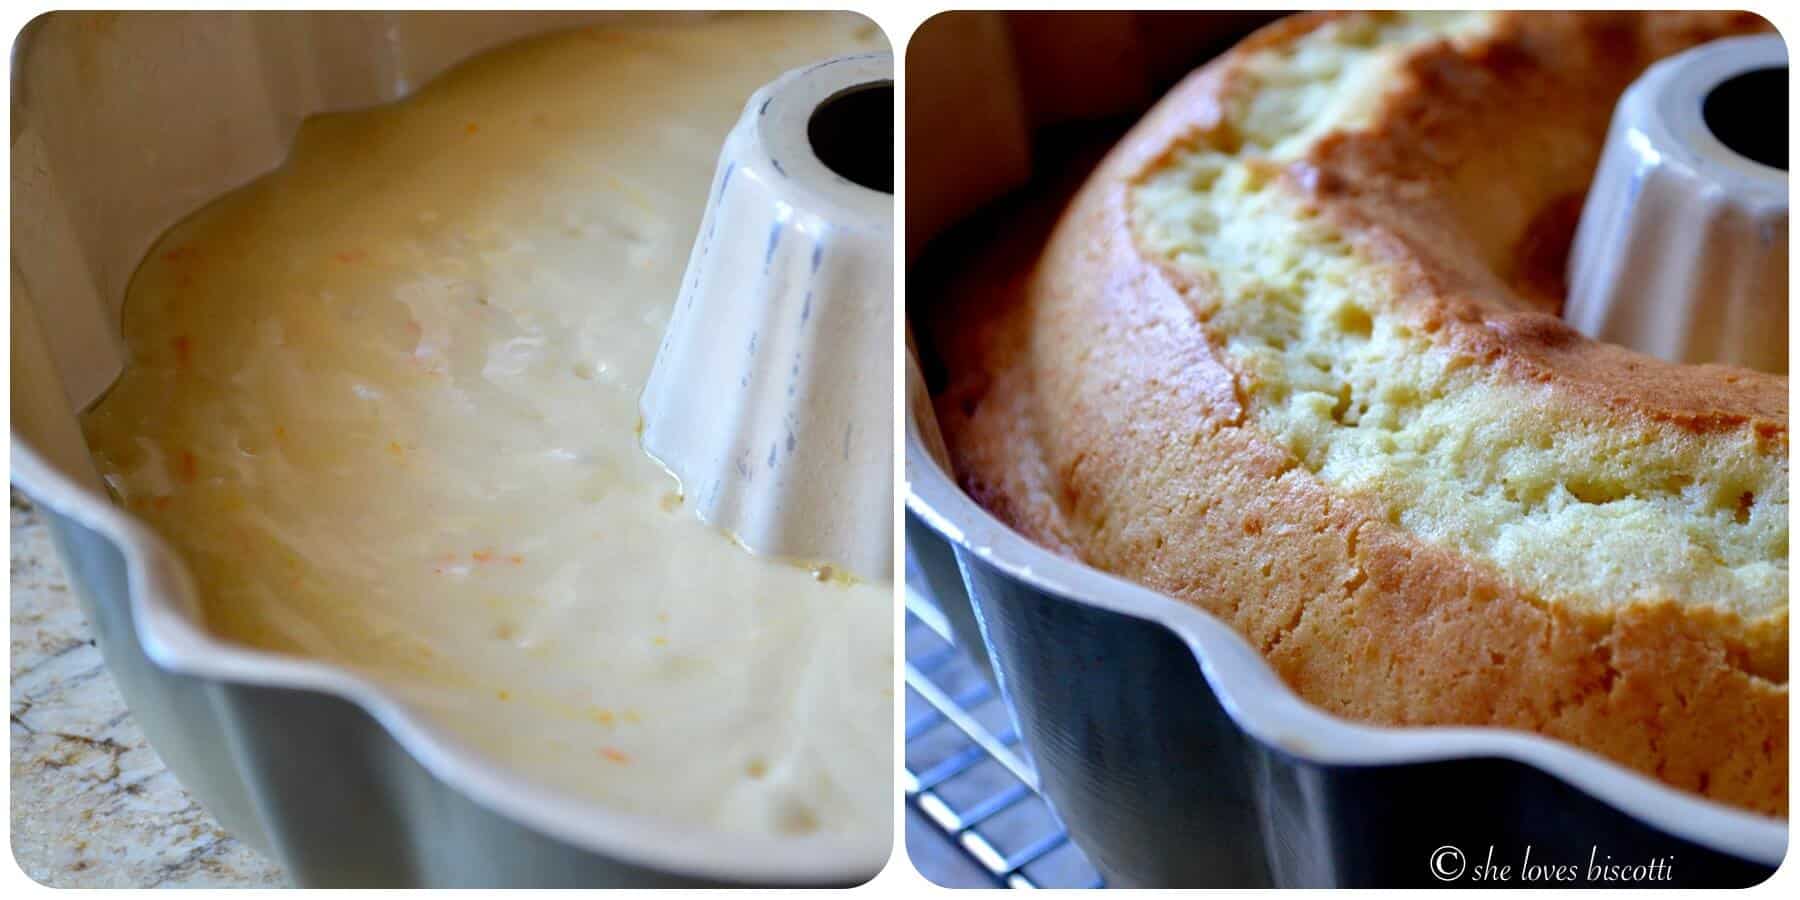 A picture showing teh batter before and after this Italian cake is baked